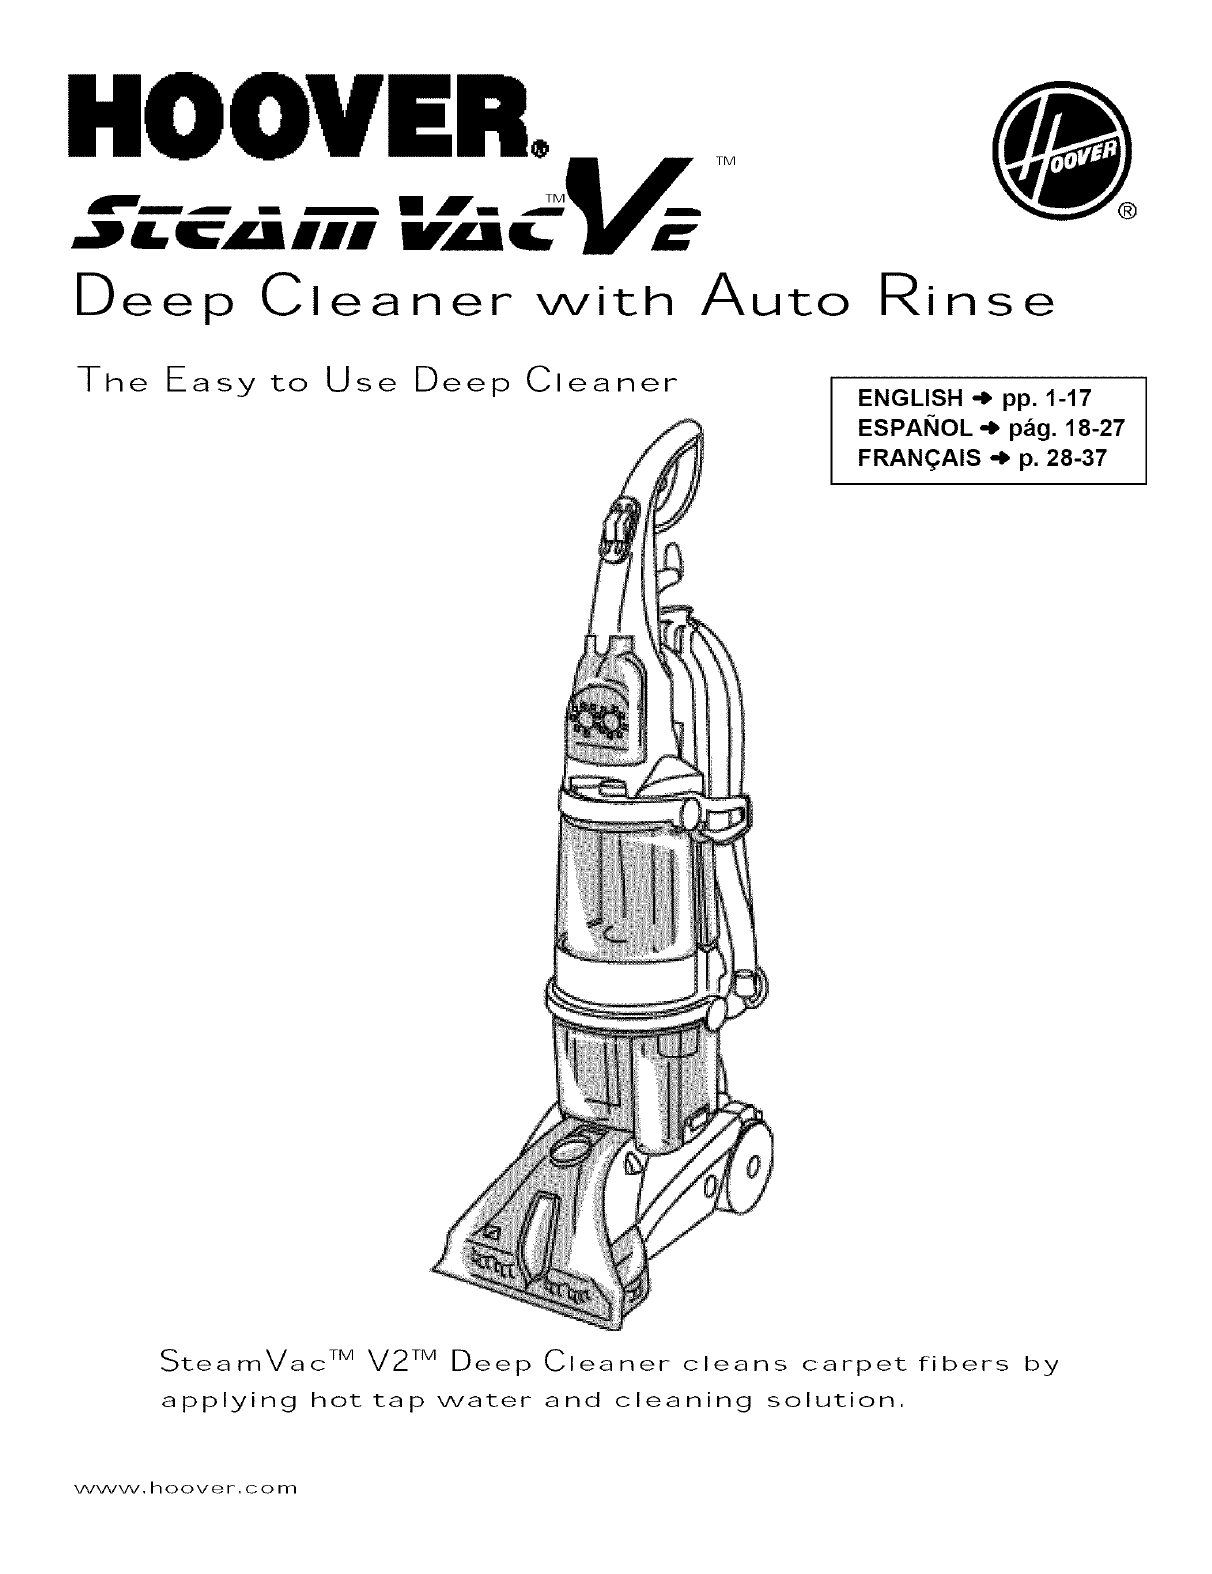 Hoover Steamvac Spinscrub Carpet Cleaner Instructions | www.resnooze.com